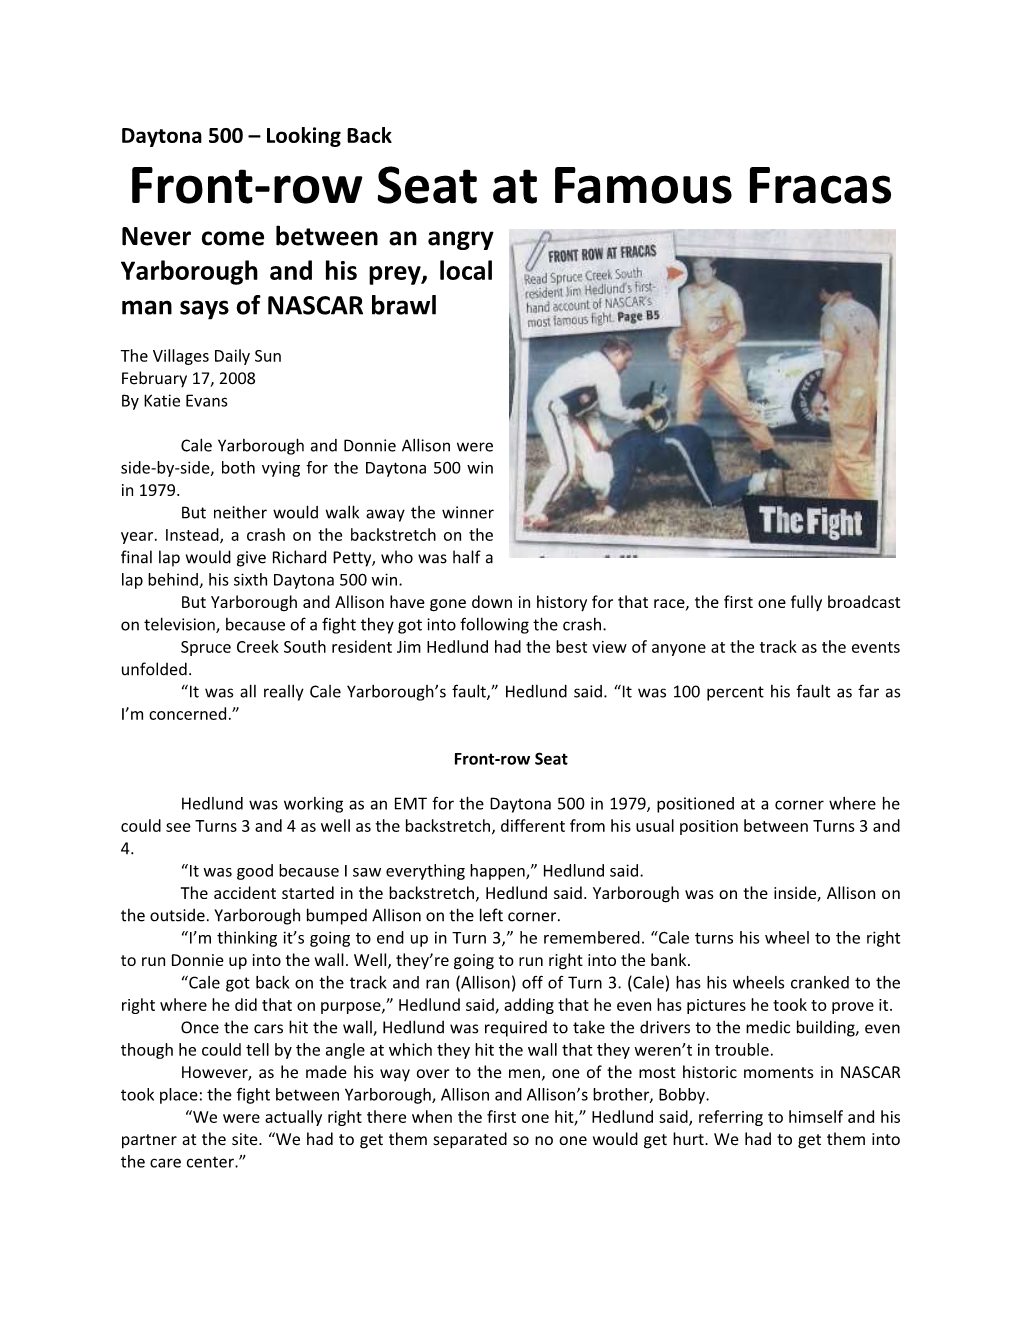 Front-Row Seat at Famous Fracas Never Come Between an Angry Yarborough and His Prey, Local Man Says of NASCAR Brawl